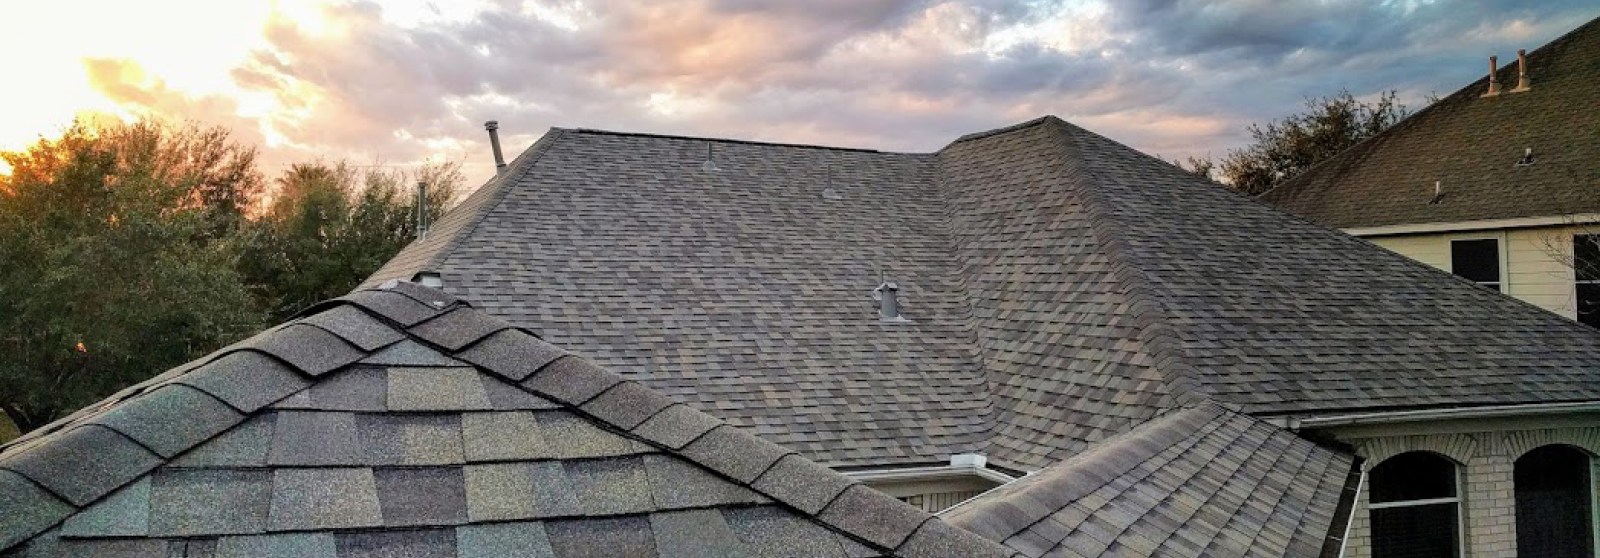 Houston Roofing Services